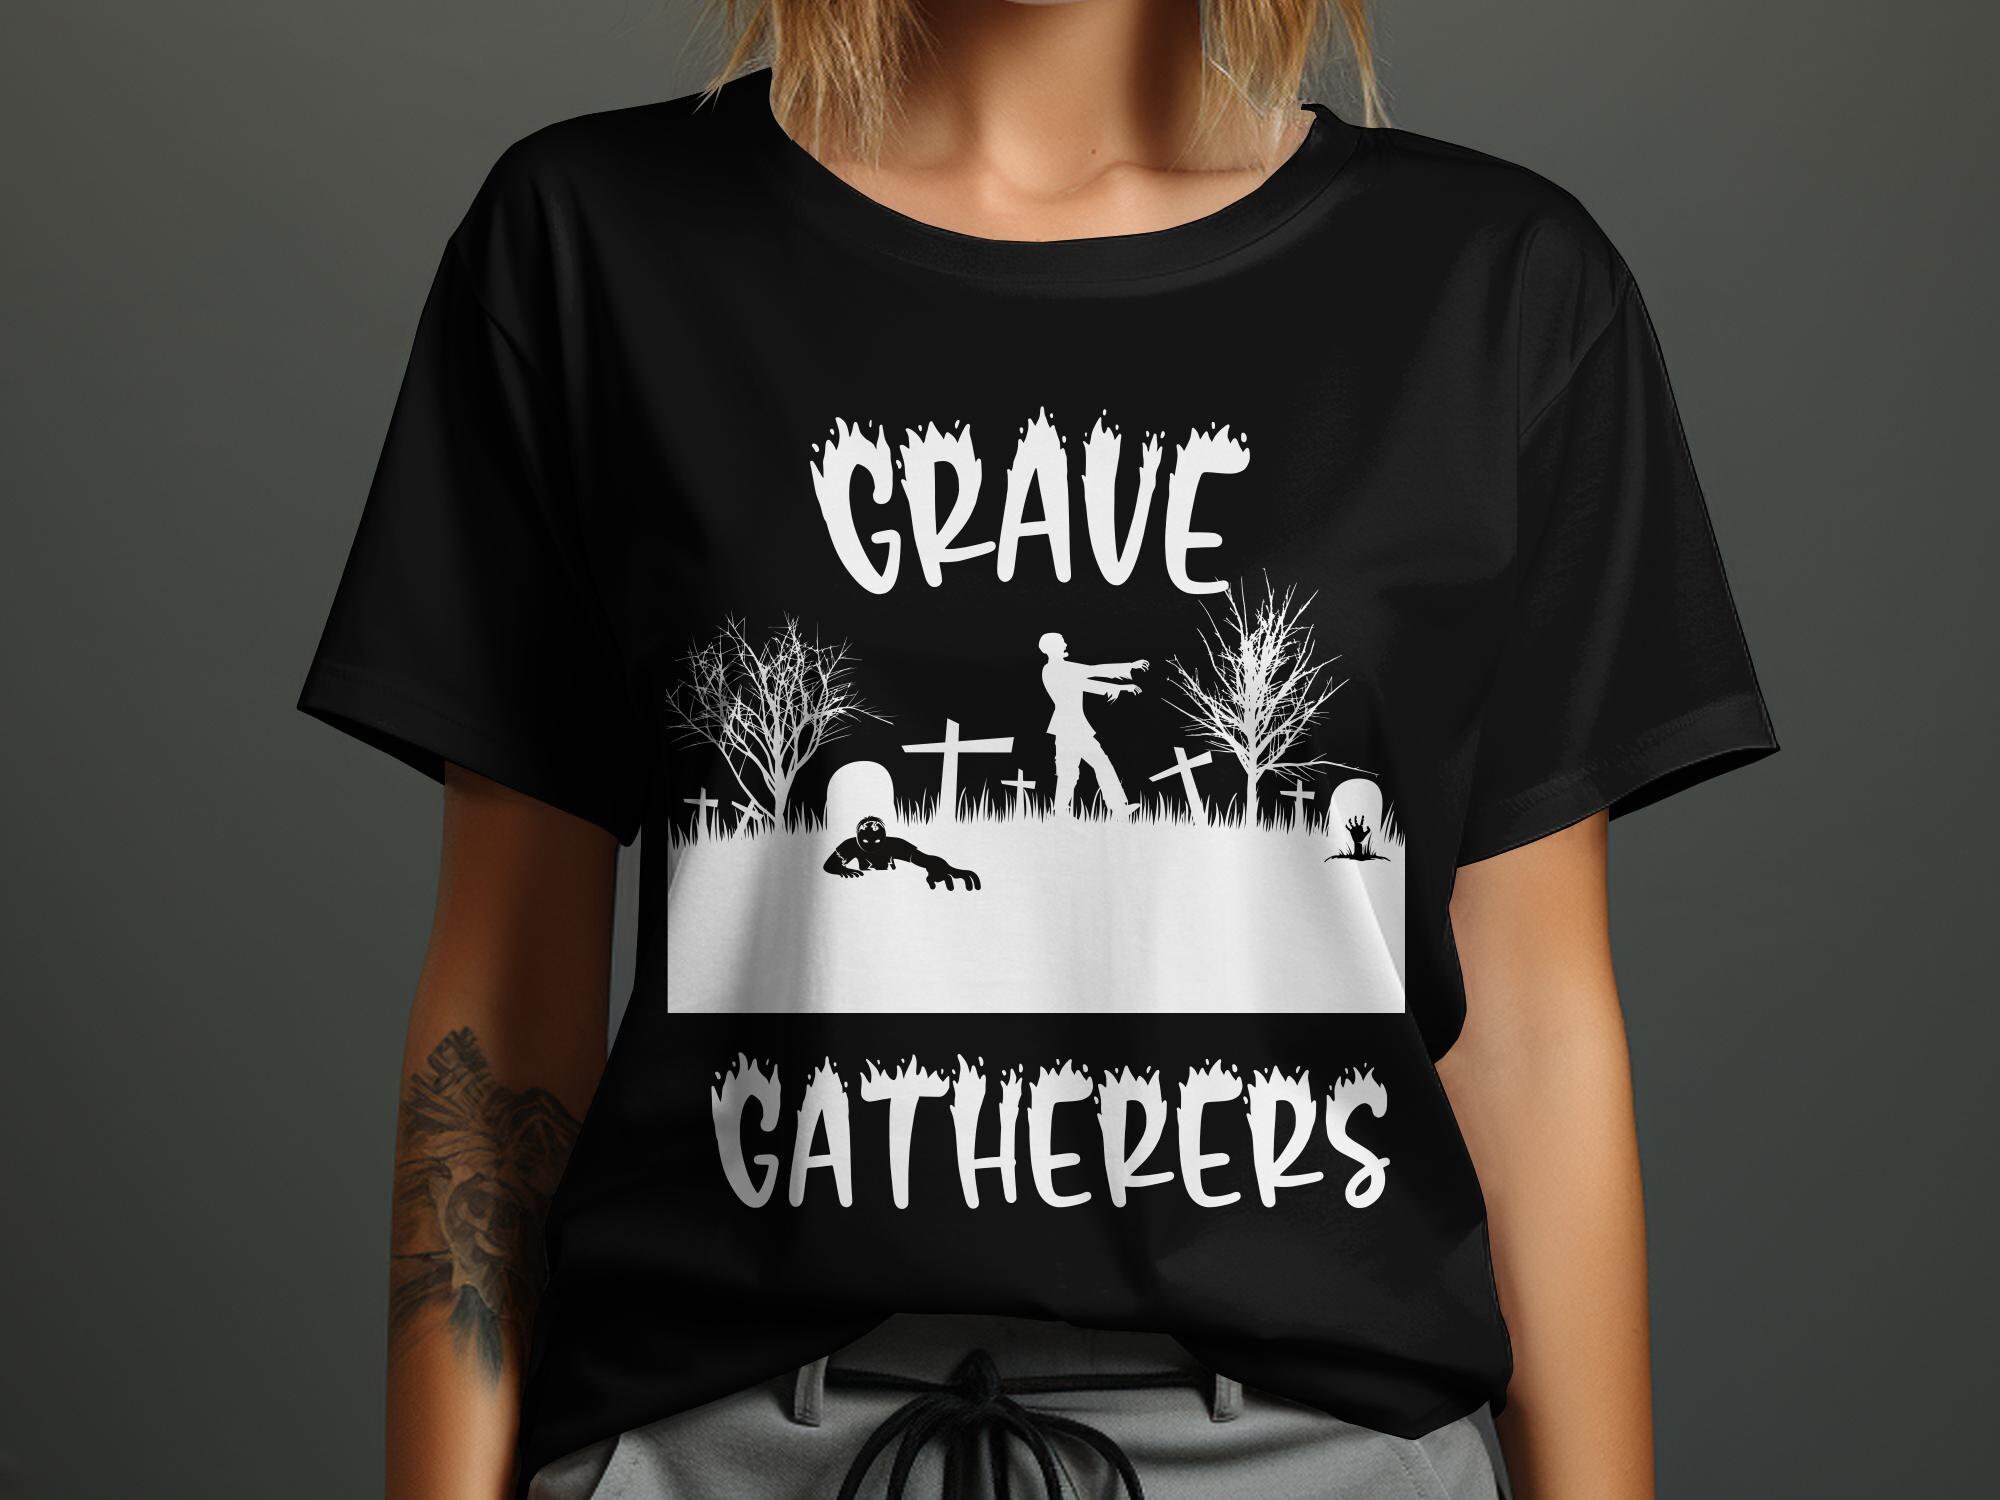 Discover Halloween Matching Zombie T-shirt, Grave Gatherers Apparel: The Ultimate in Zombie Group Fashion funny shirt, costume party tee